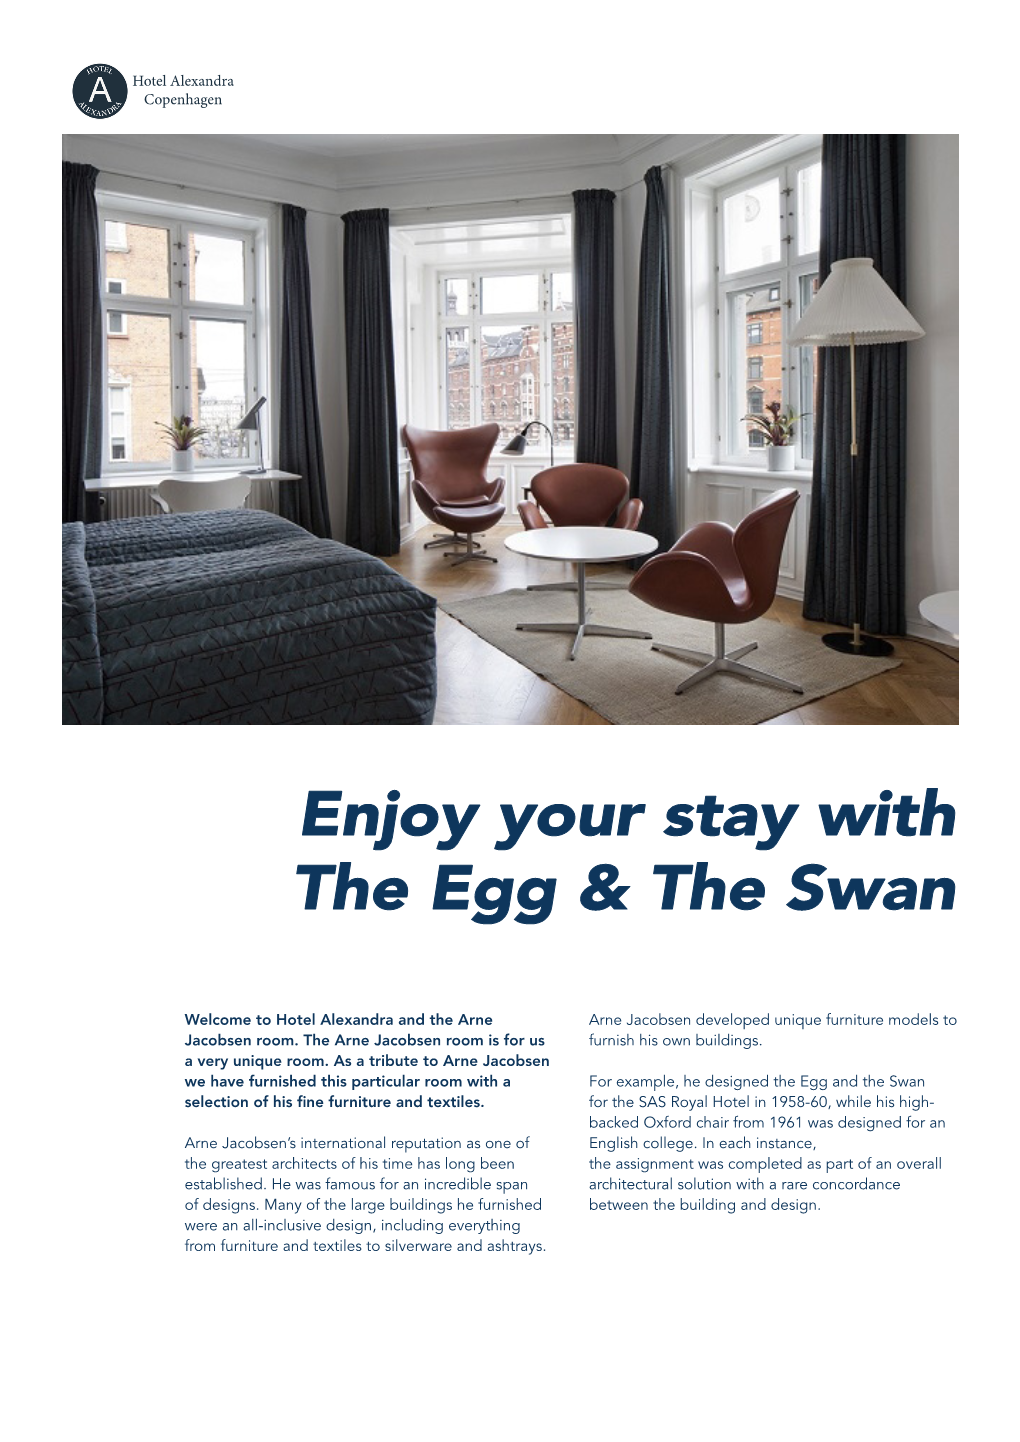 Enjoy Your Stay with the Egg & the Swan